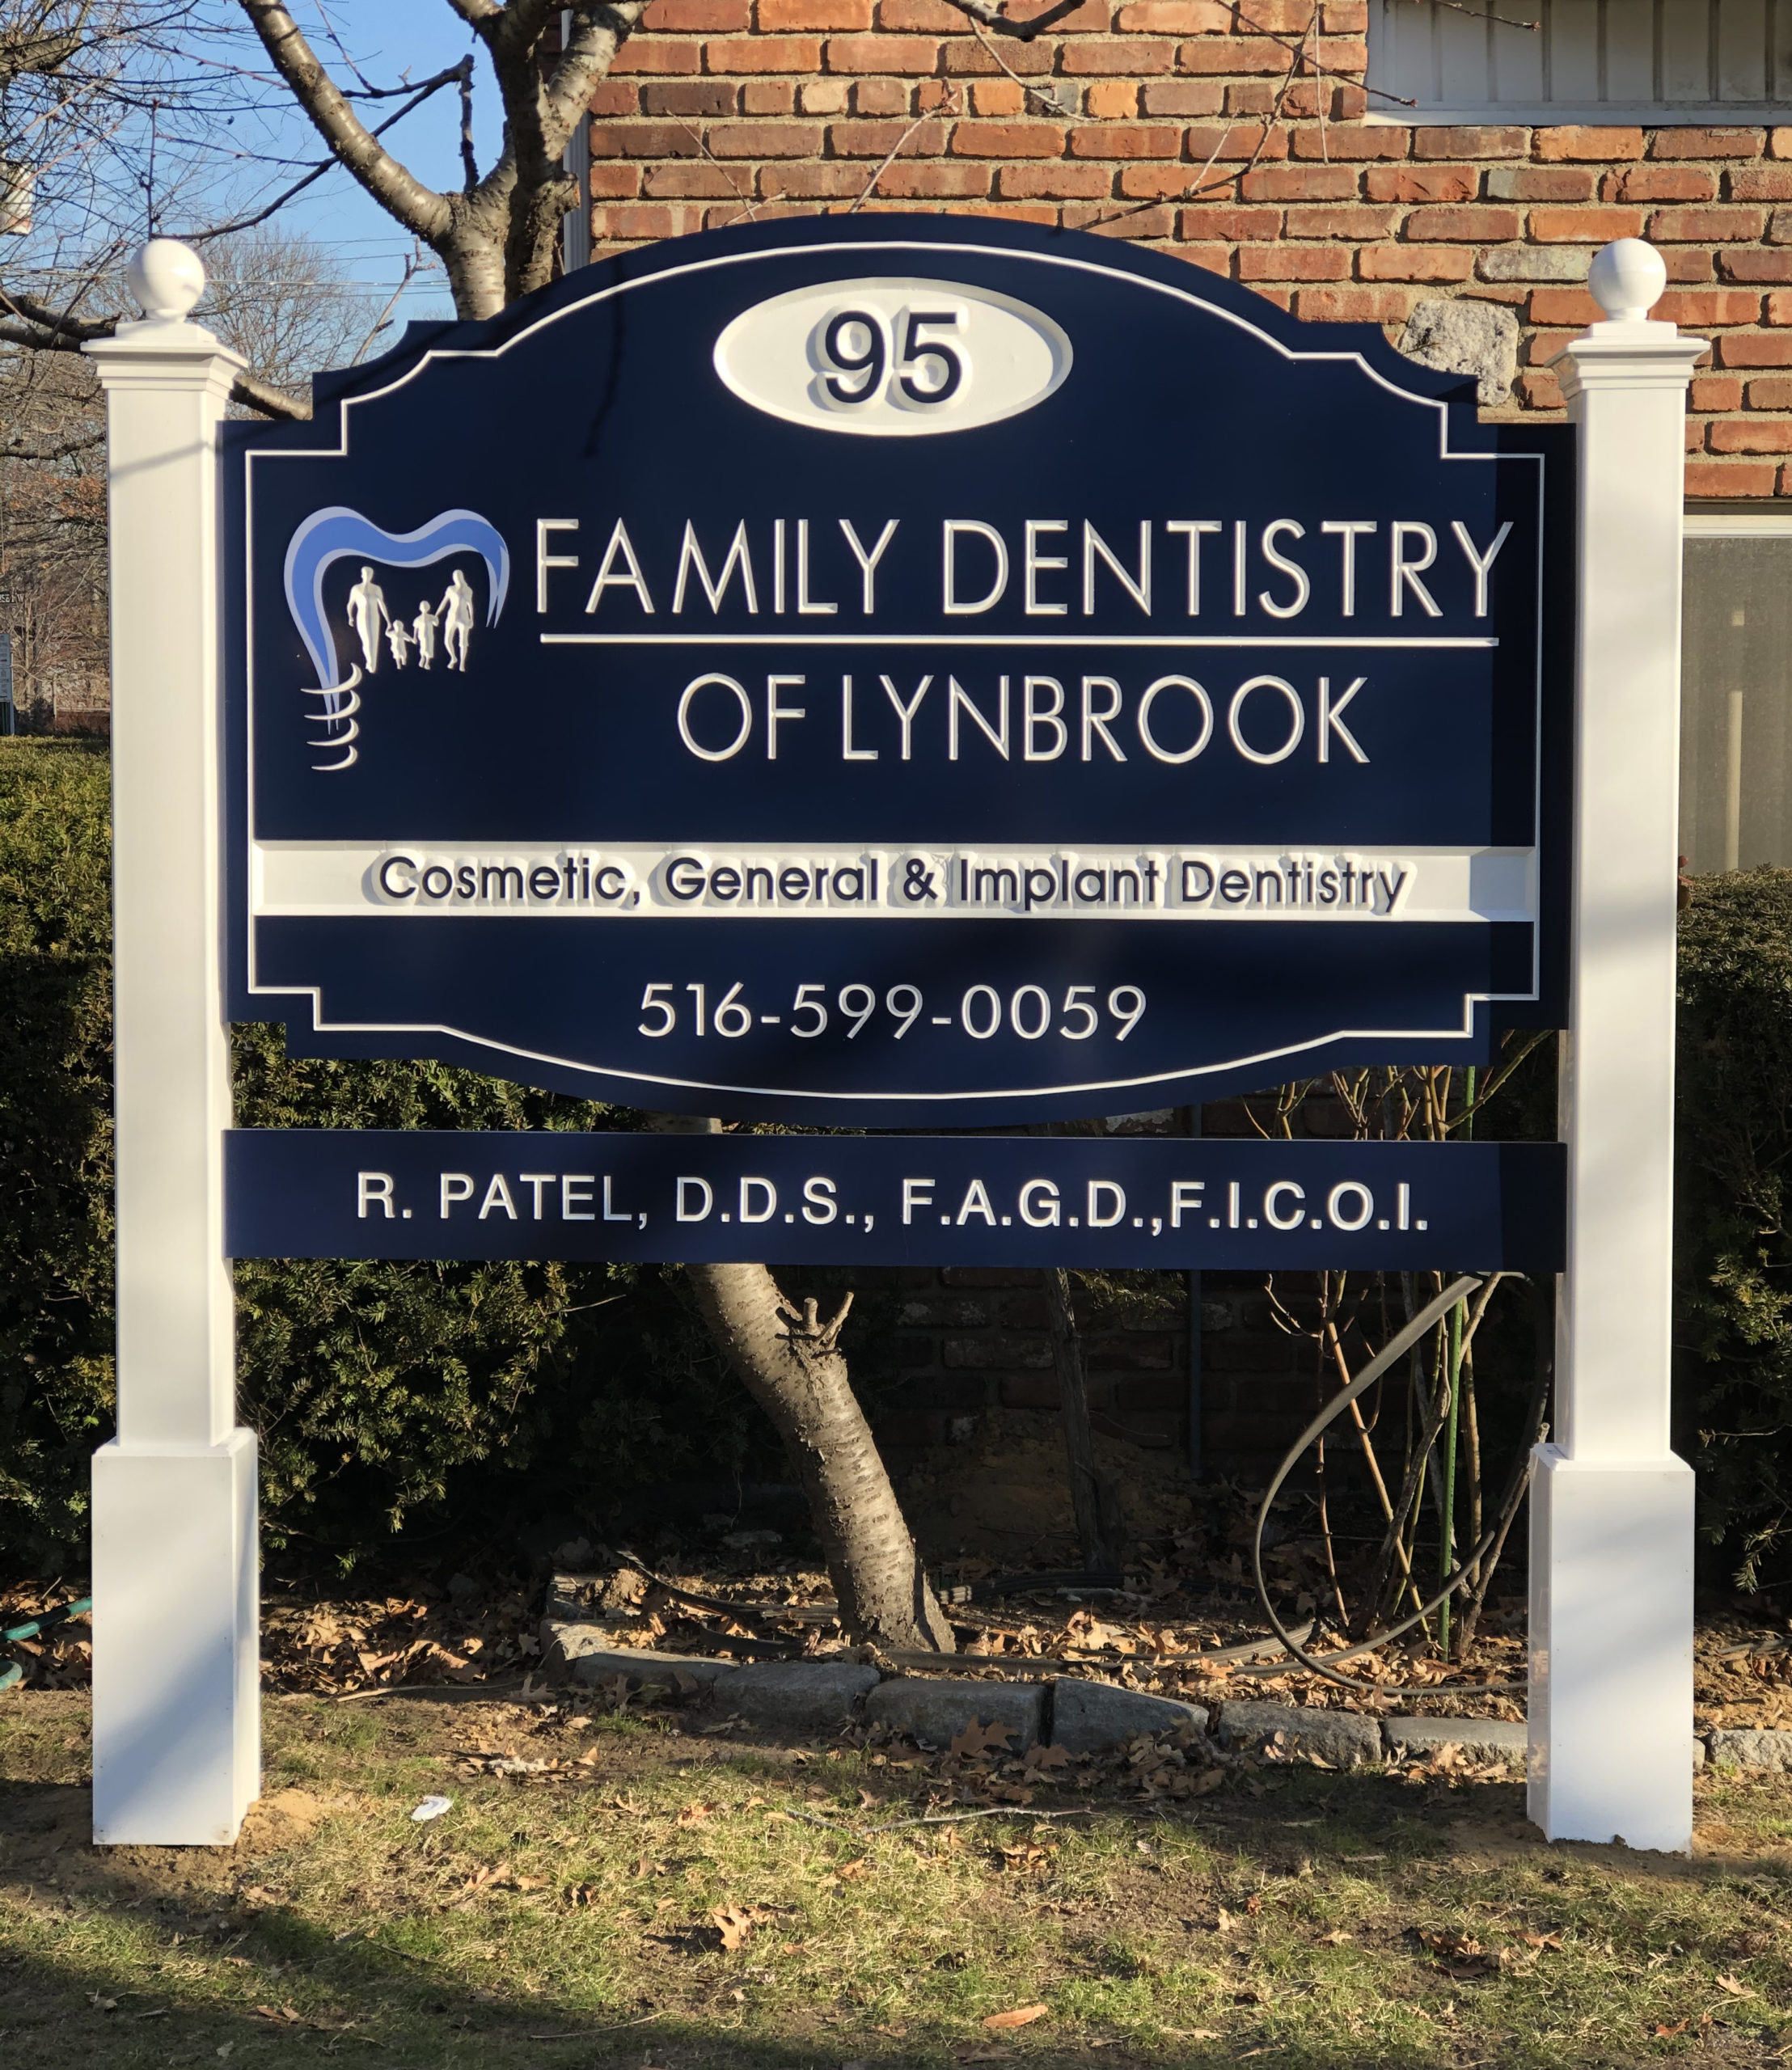 Family Dentistry of Lynbrook practice signage